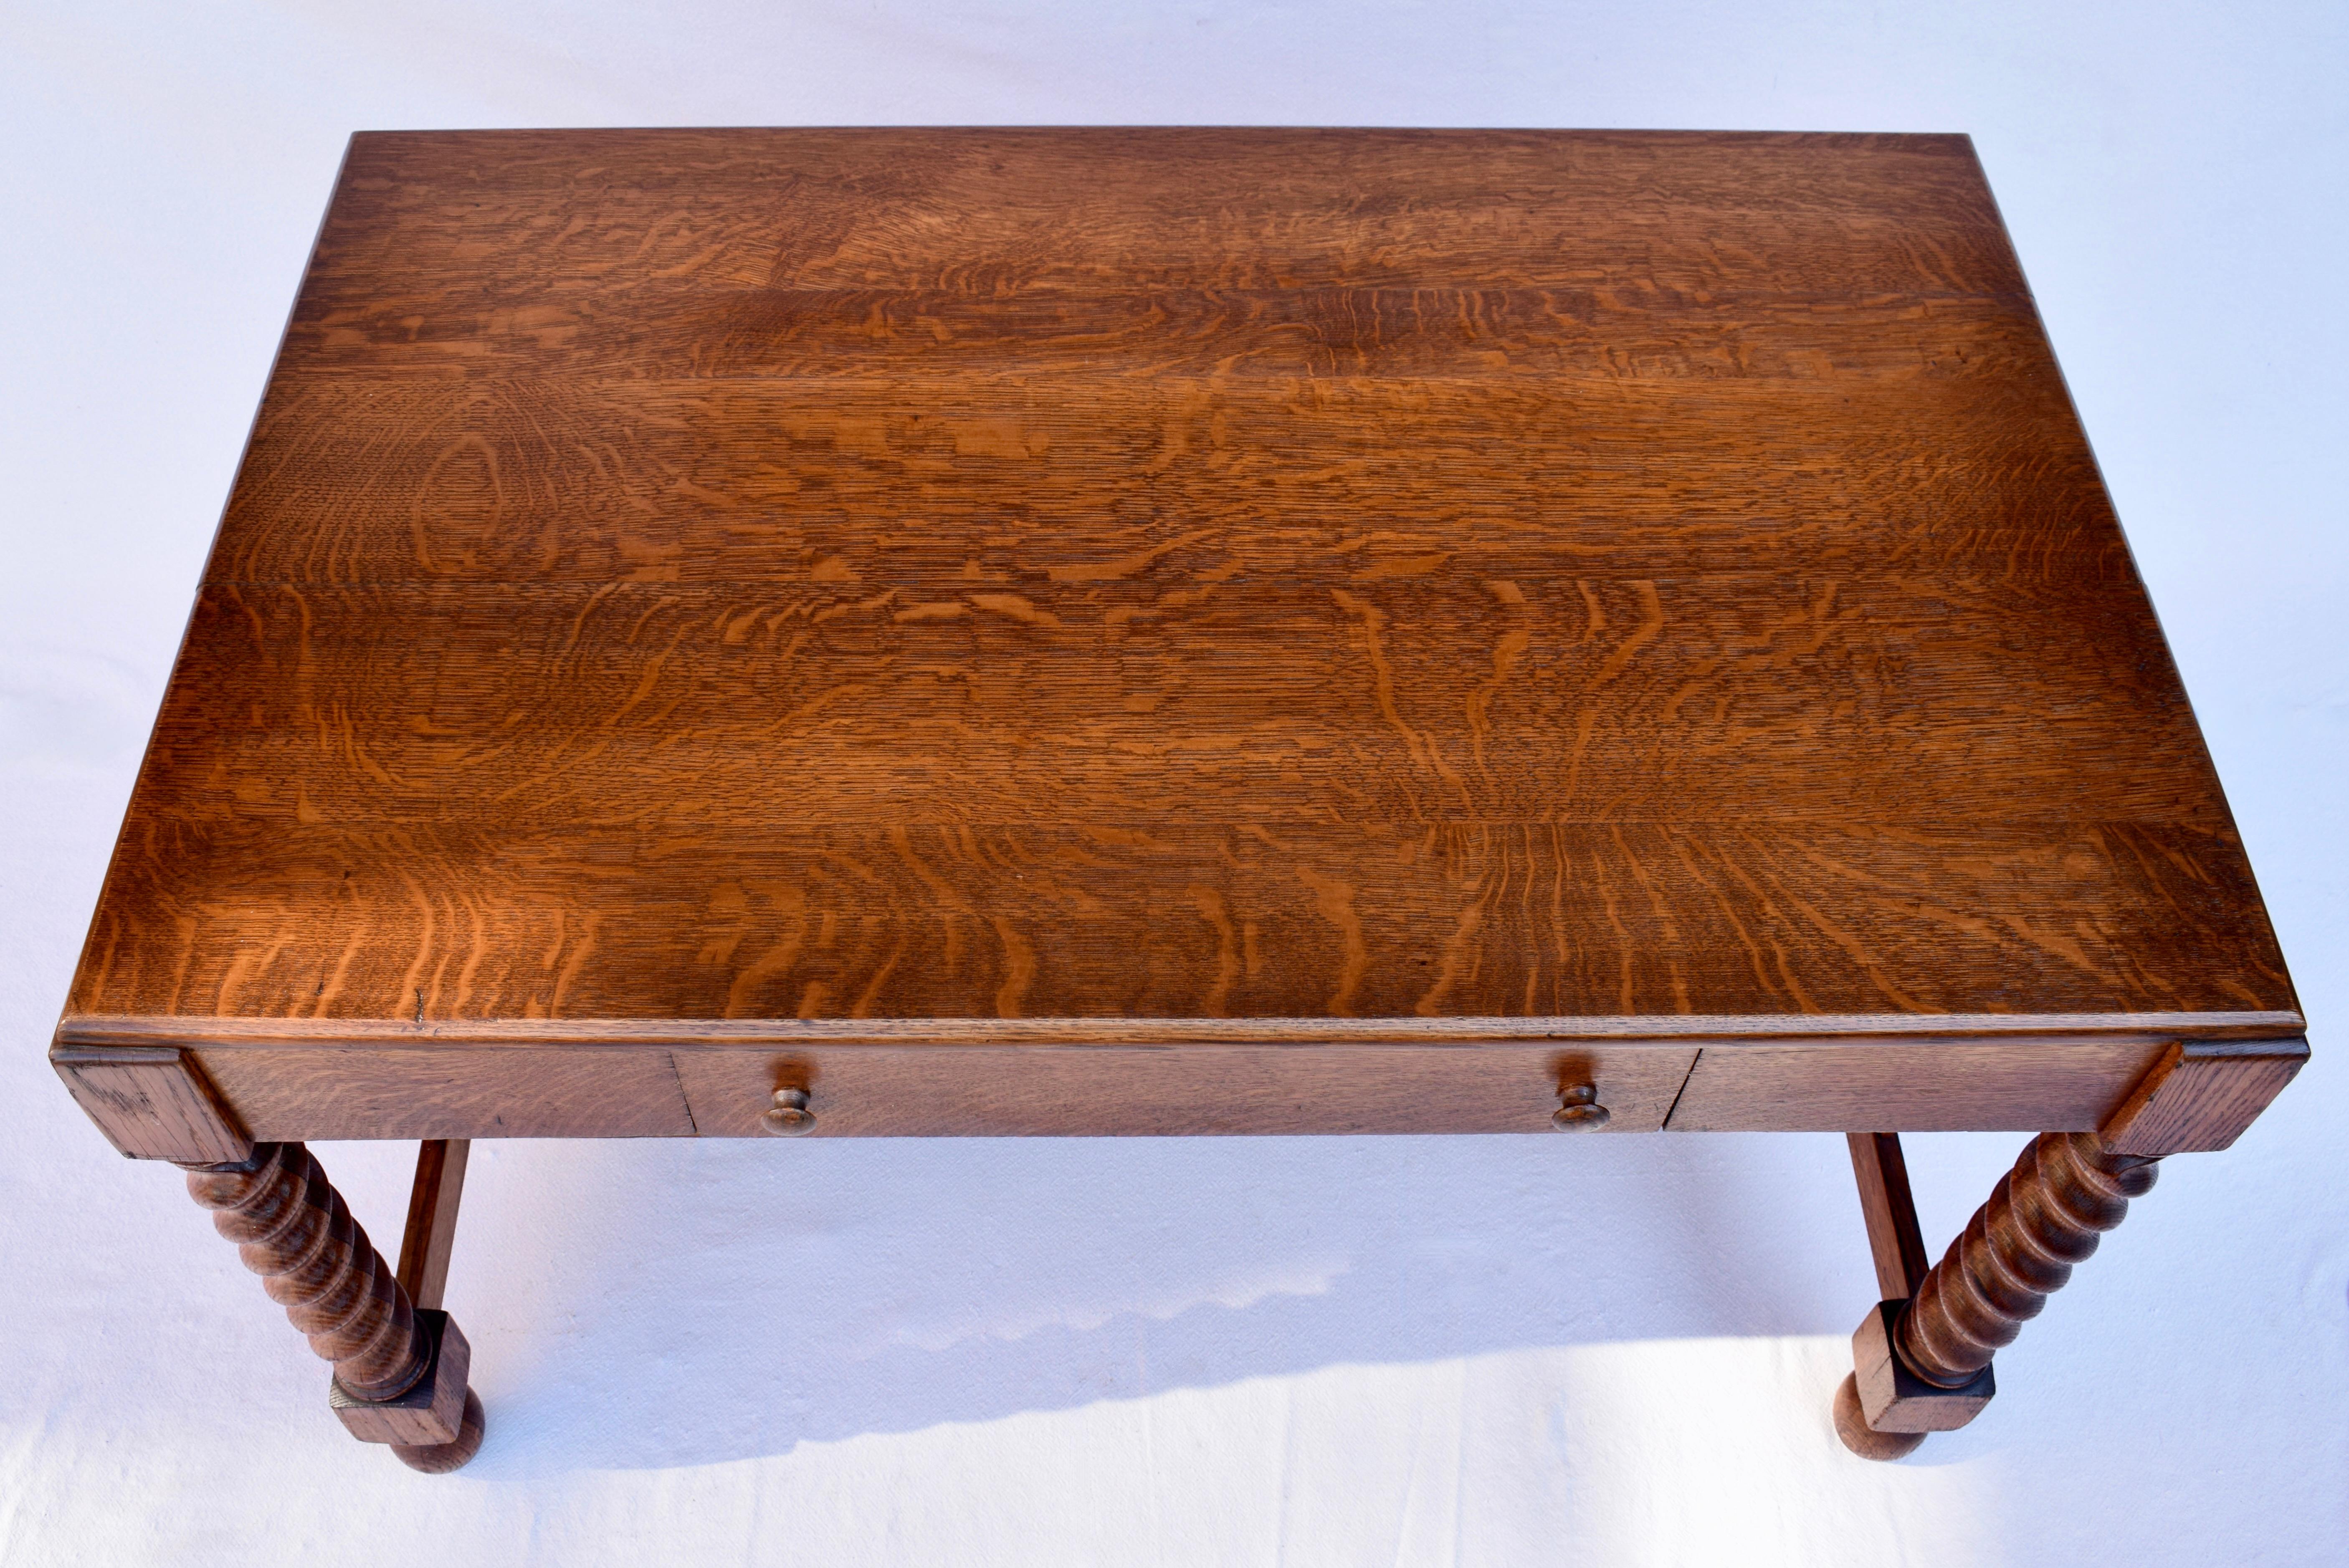 American antique Arts & Crafts solid quarter sawn Oak library table with original finish. Unusual in its distinct Mission & English influences. Boasts a single drawer with impressive barely twist legs. Circa early 20th century.  Tag remnant remains: